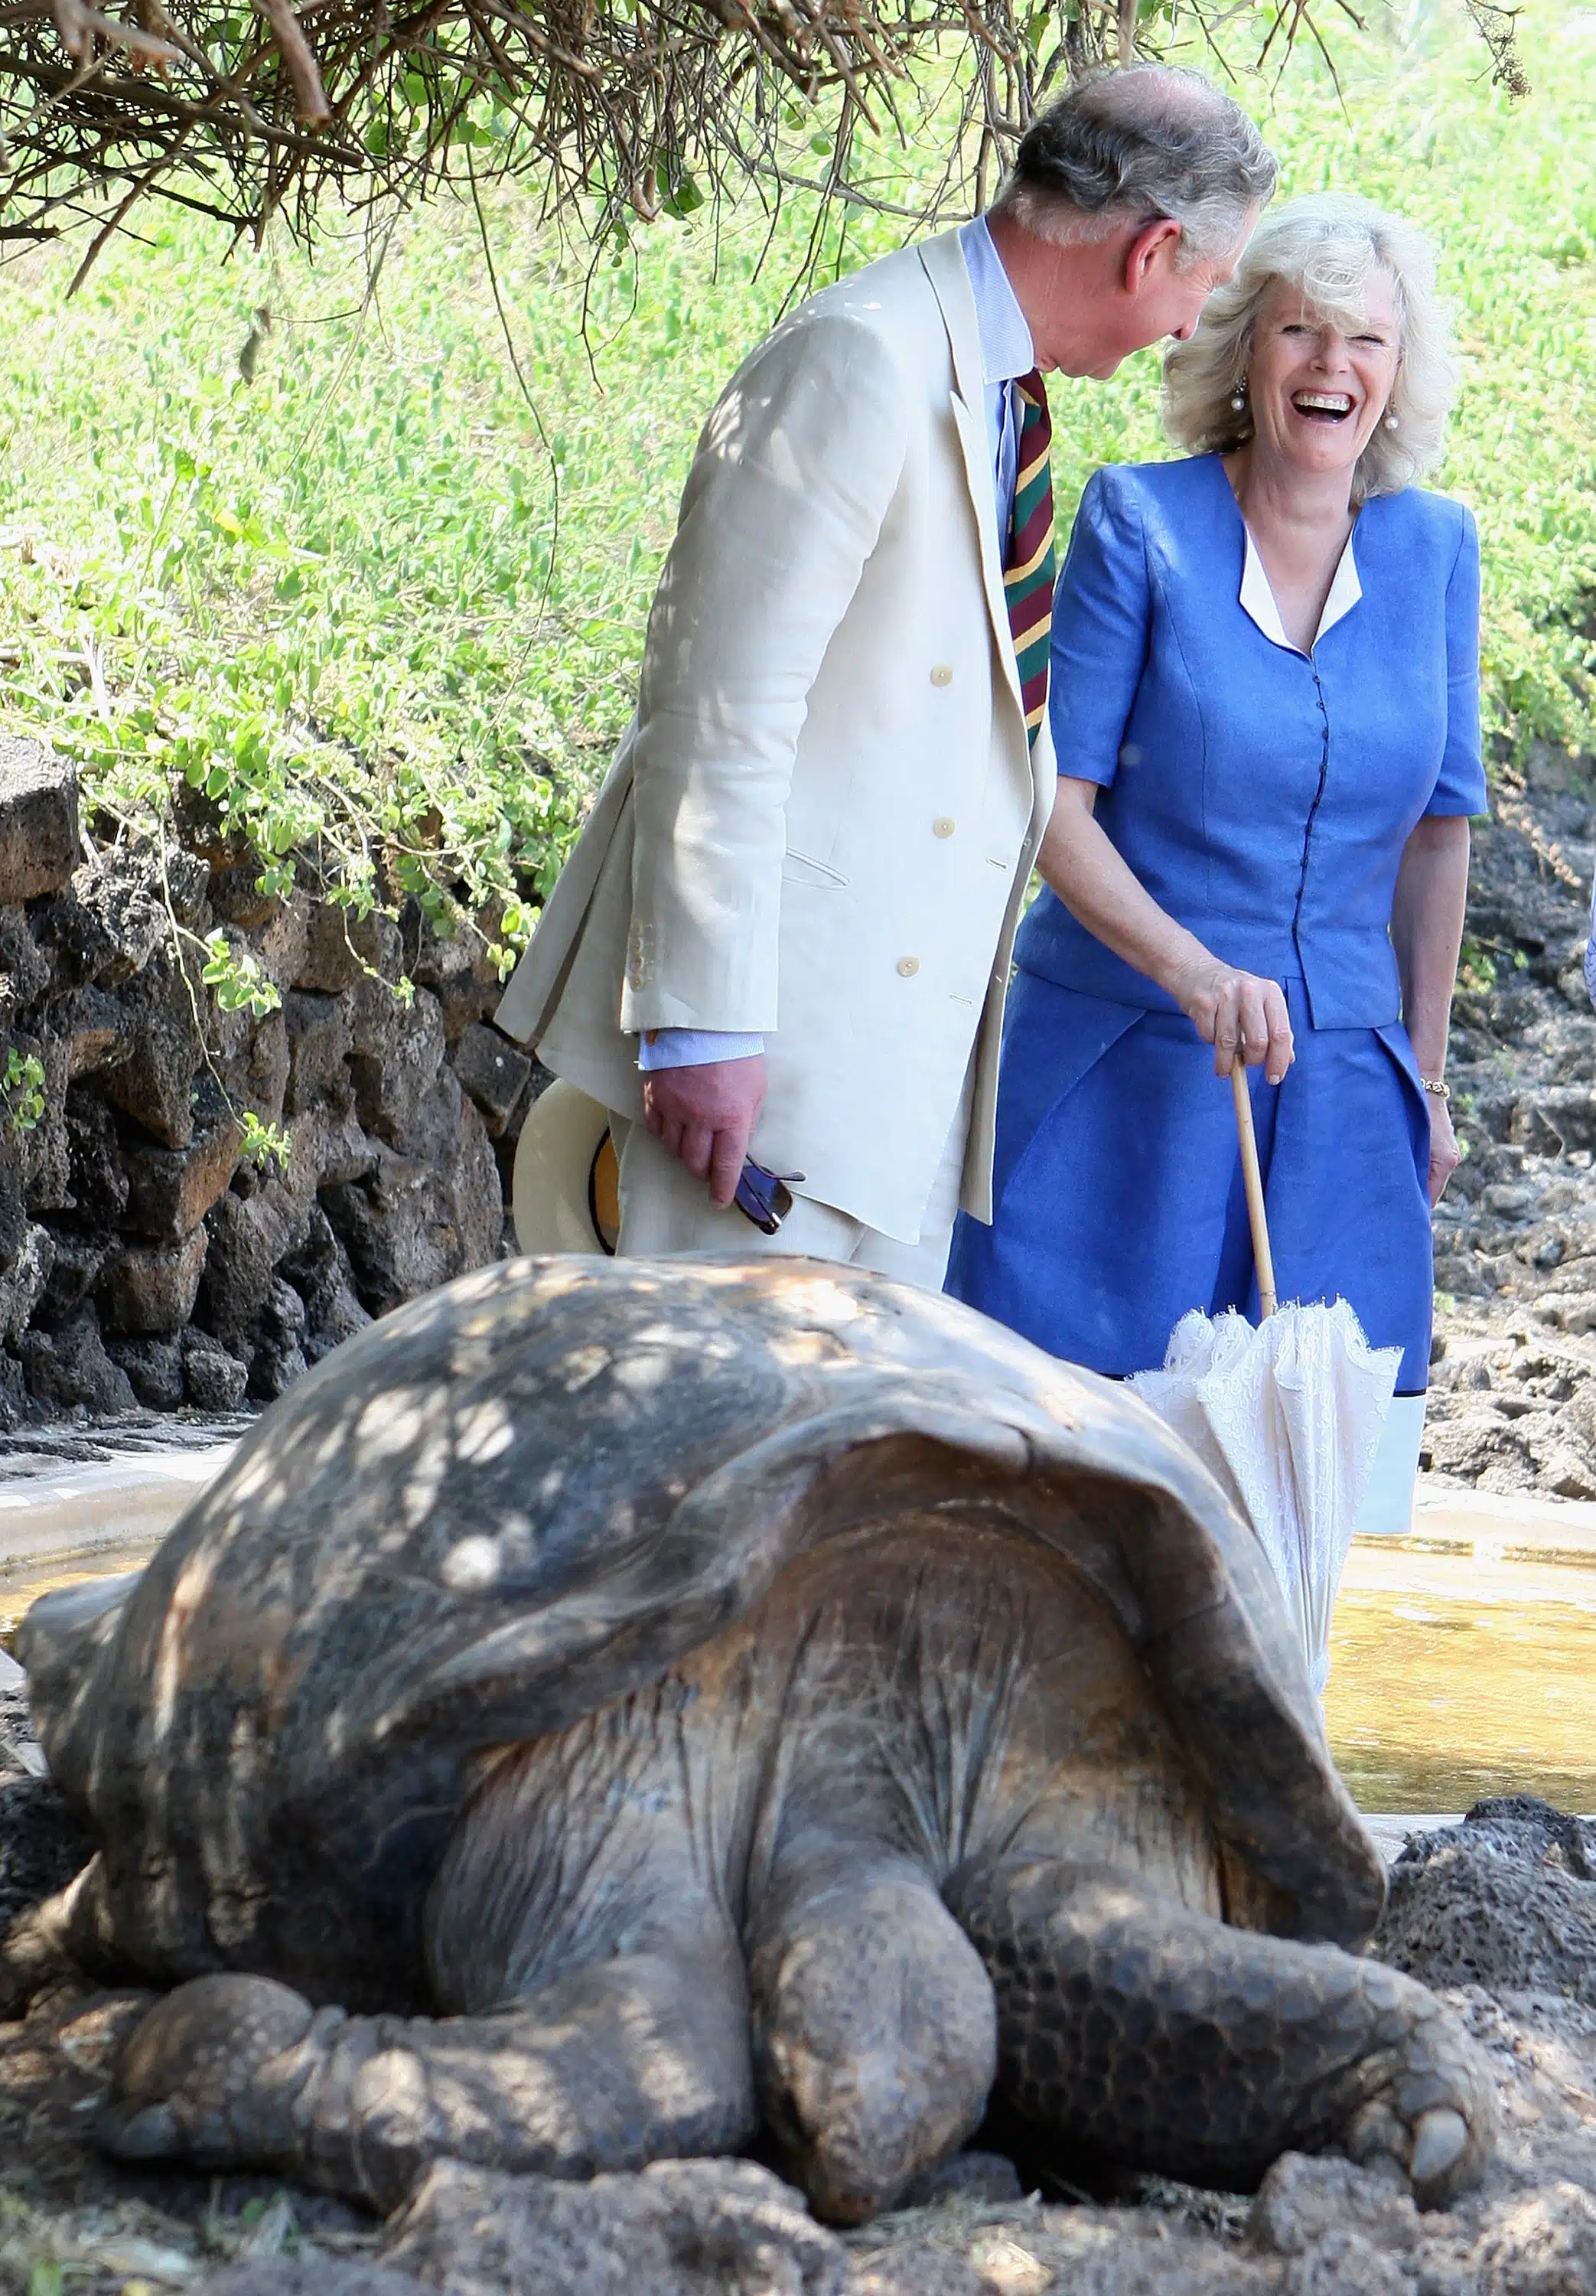 GALAPAGOS, ECUADOR - MARCH 16:  TRH Prince Charles, Prince of Wales and Camilla, Duchess of Cornwall meet giant tortoises during a tour of the Darwin Research Station on Santa Cruz Island on March 16, 2009 in Galapagos, Ecuador. The Prince and the Duchess are in The Galapagos as part of a ten-day tour of South America taking in Chile, Brazil, Ecuador and the Galapagos